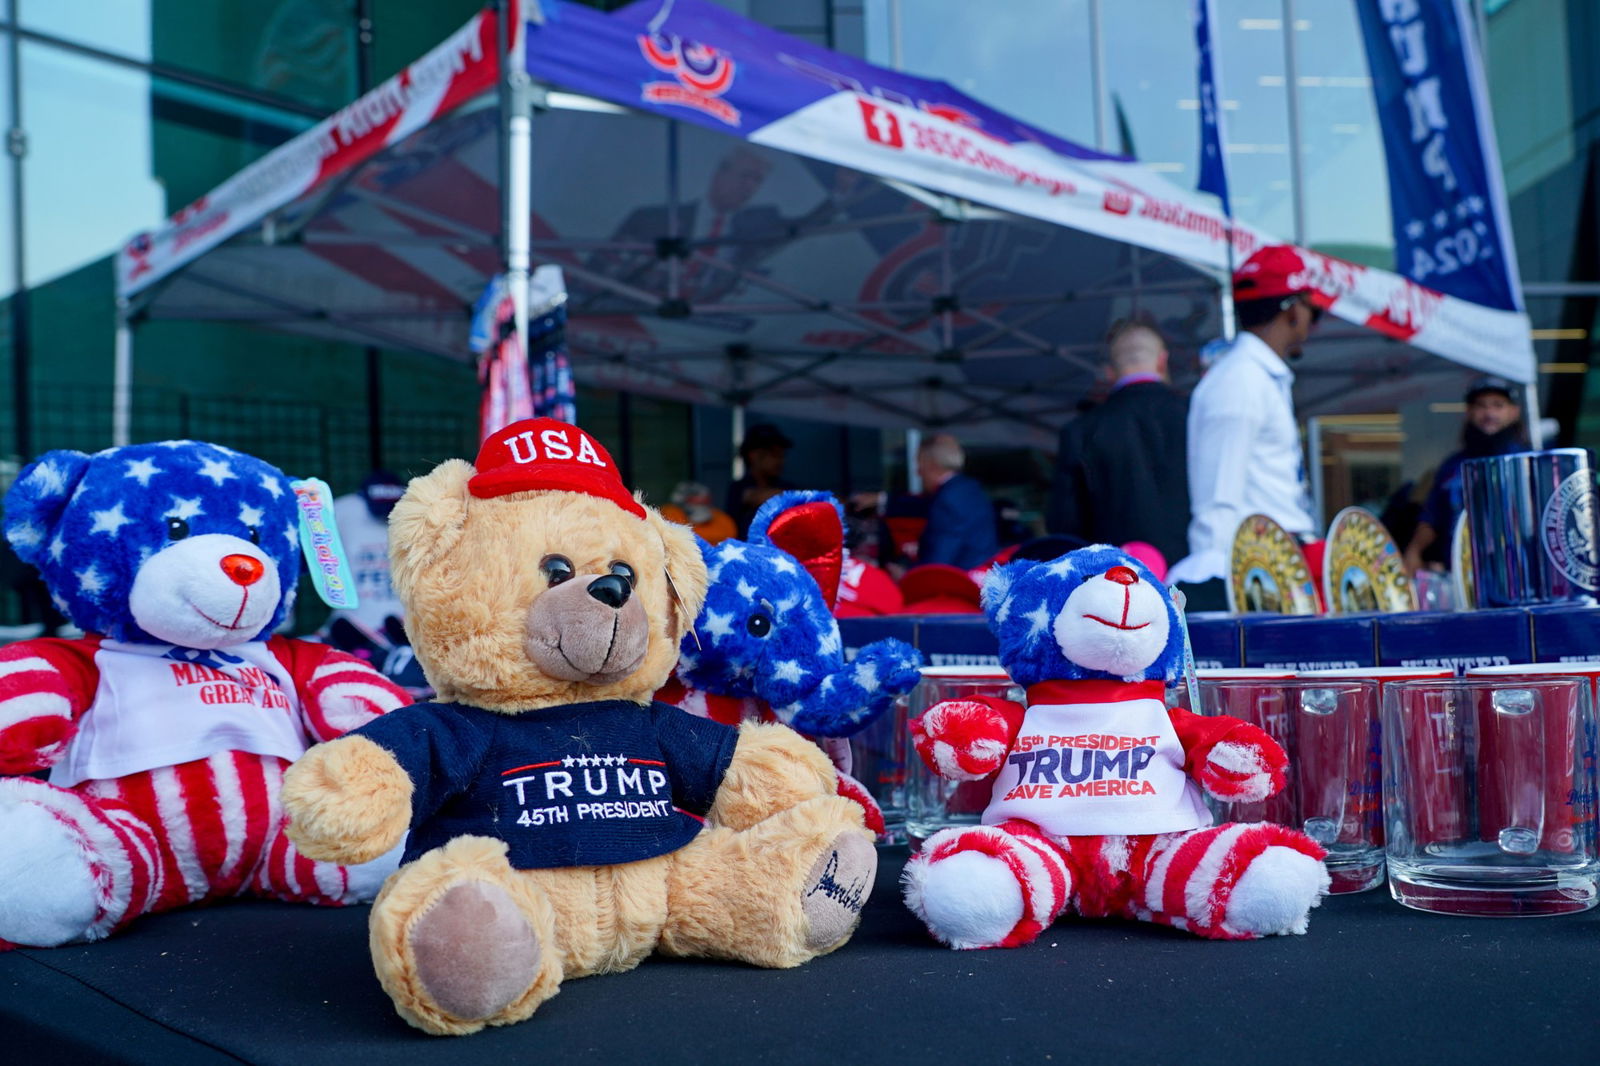 Teddies wearing Trump shirts and USA hats sit on a table